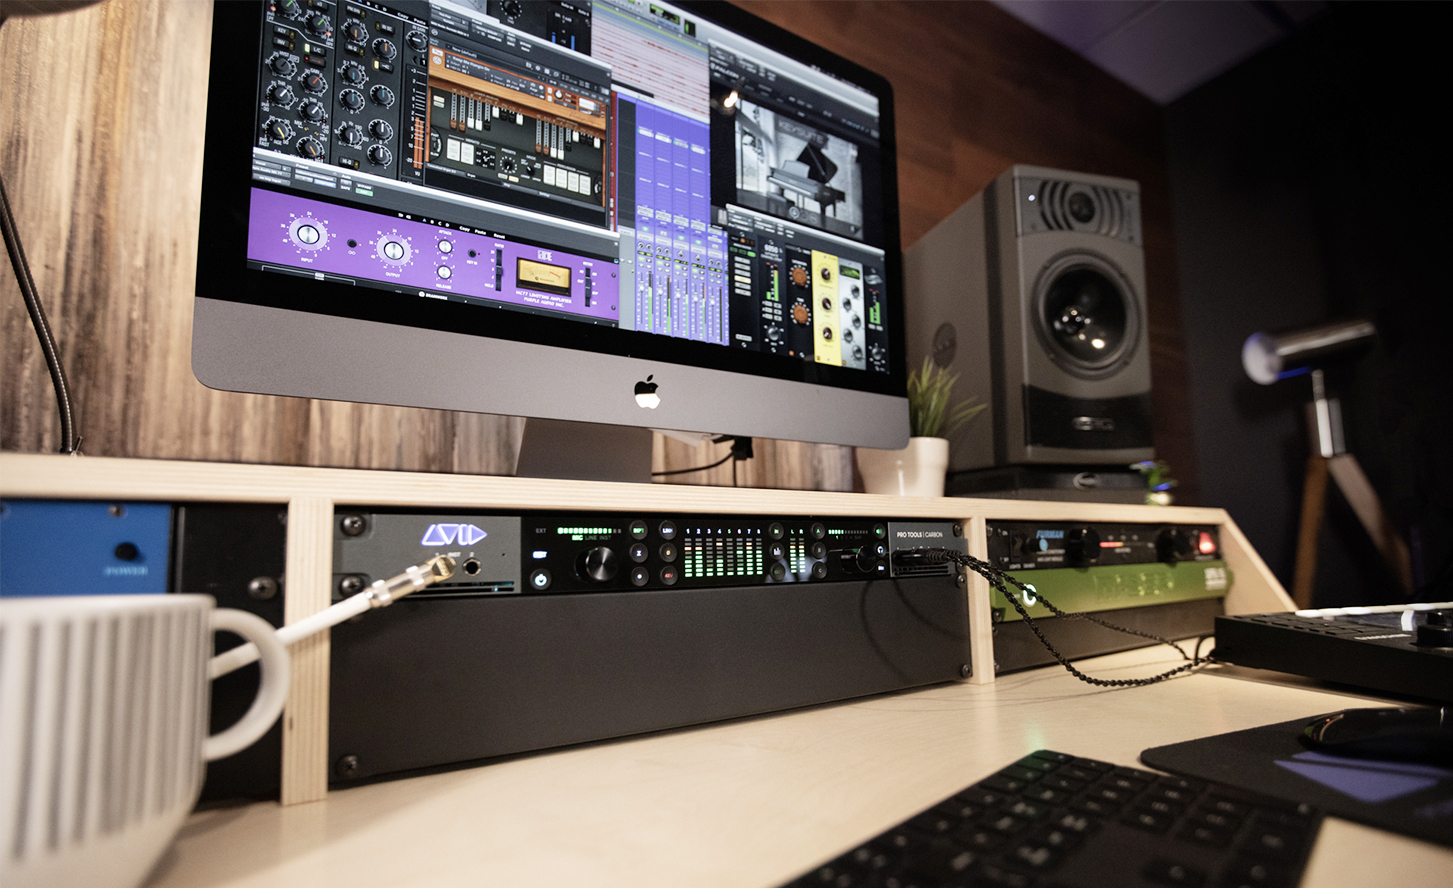 Avid Carbon Pro Tools audio interface in studio rack with iMac